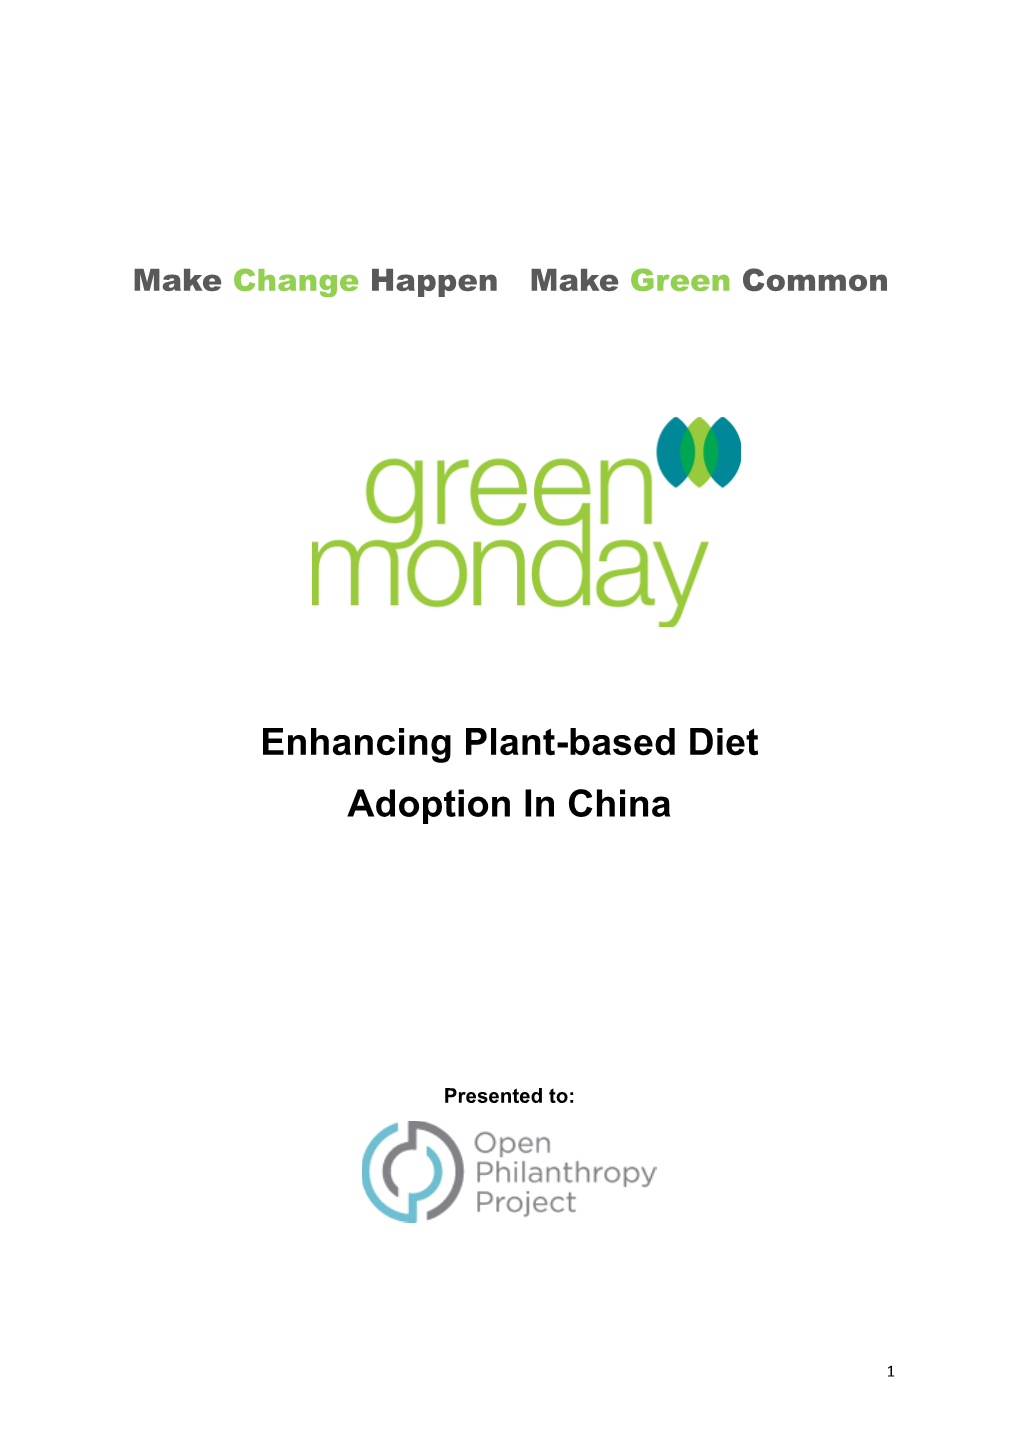 Enhancing Plant-Based Diet Adoption in China